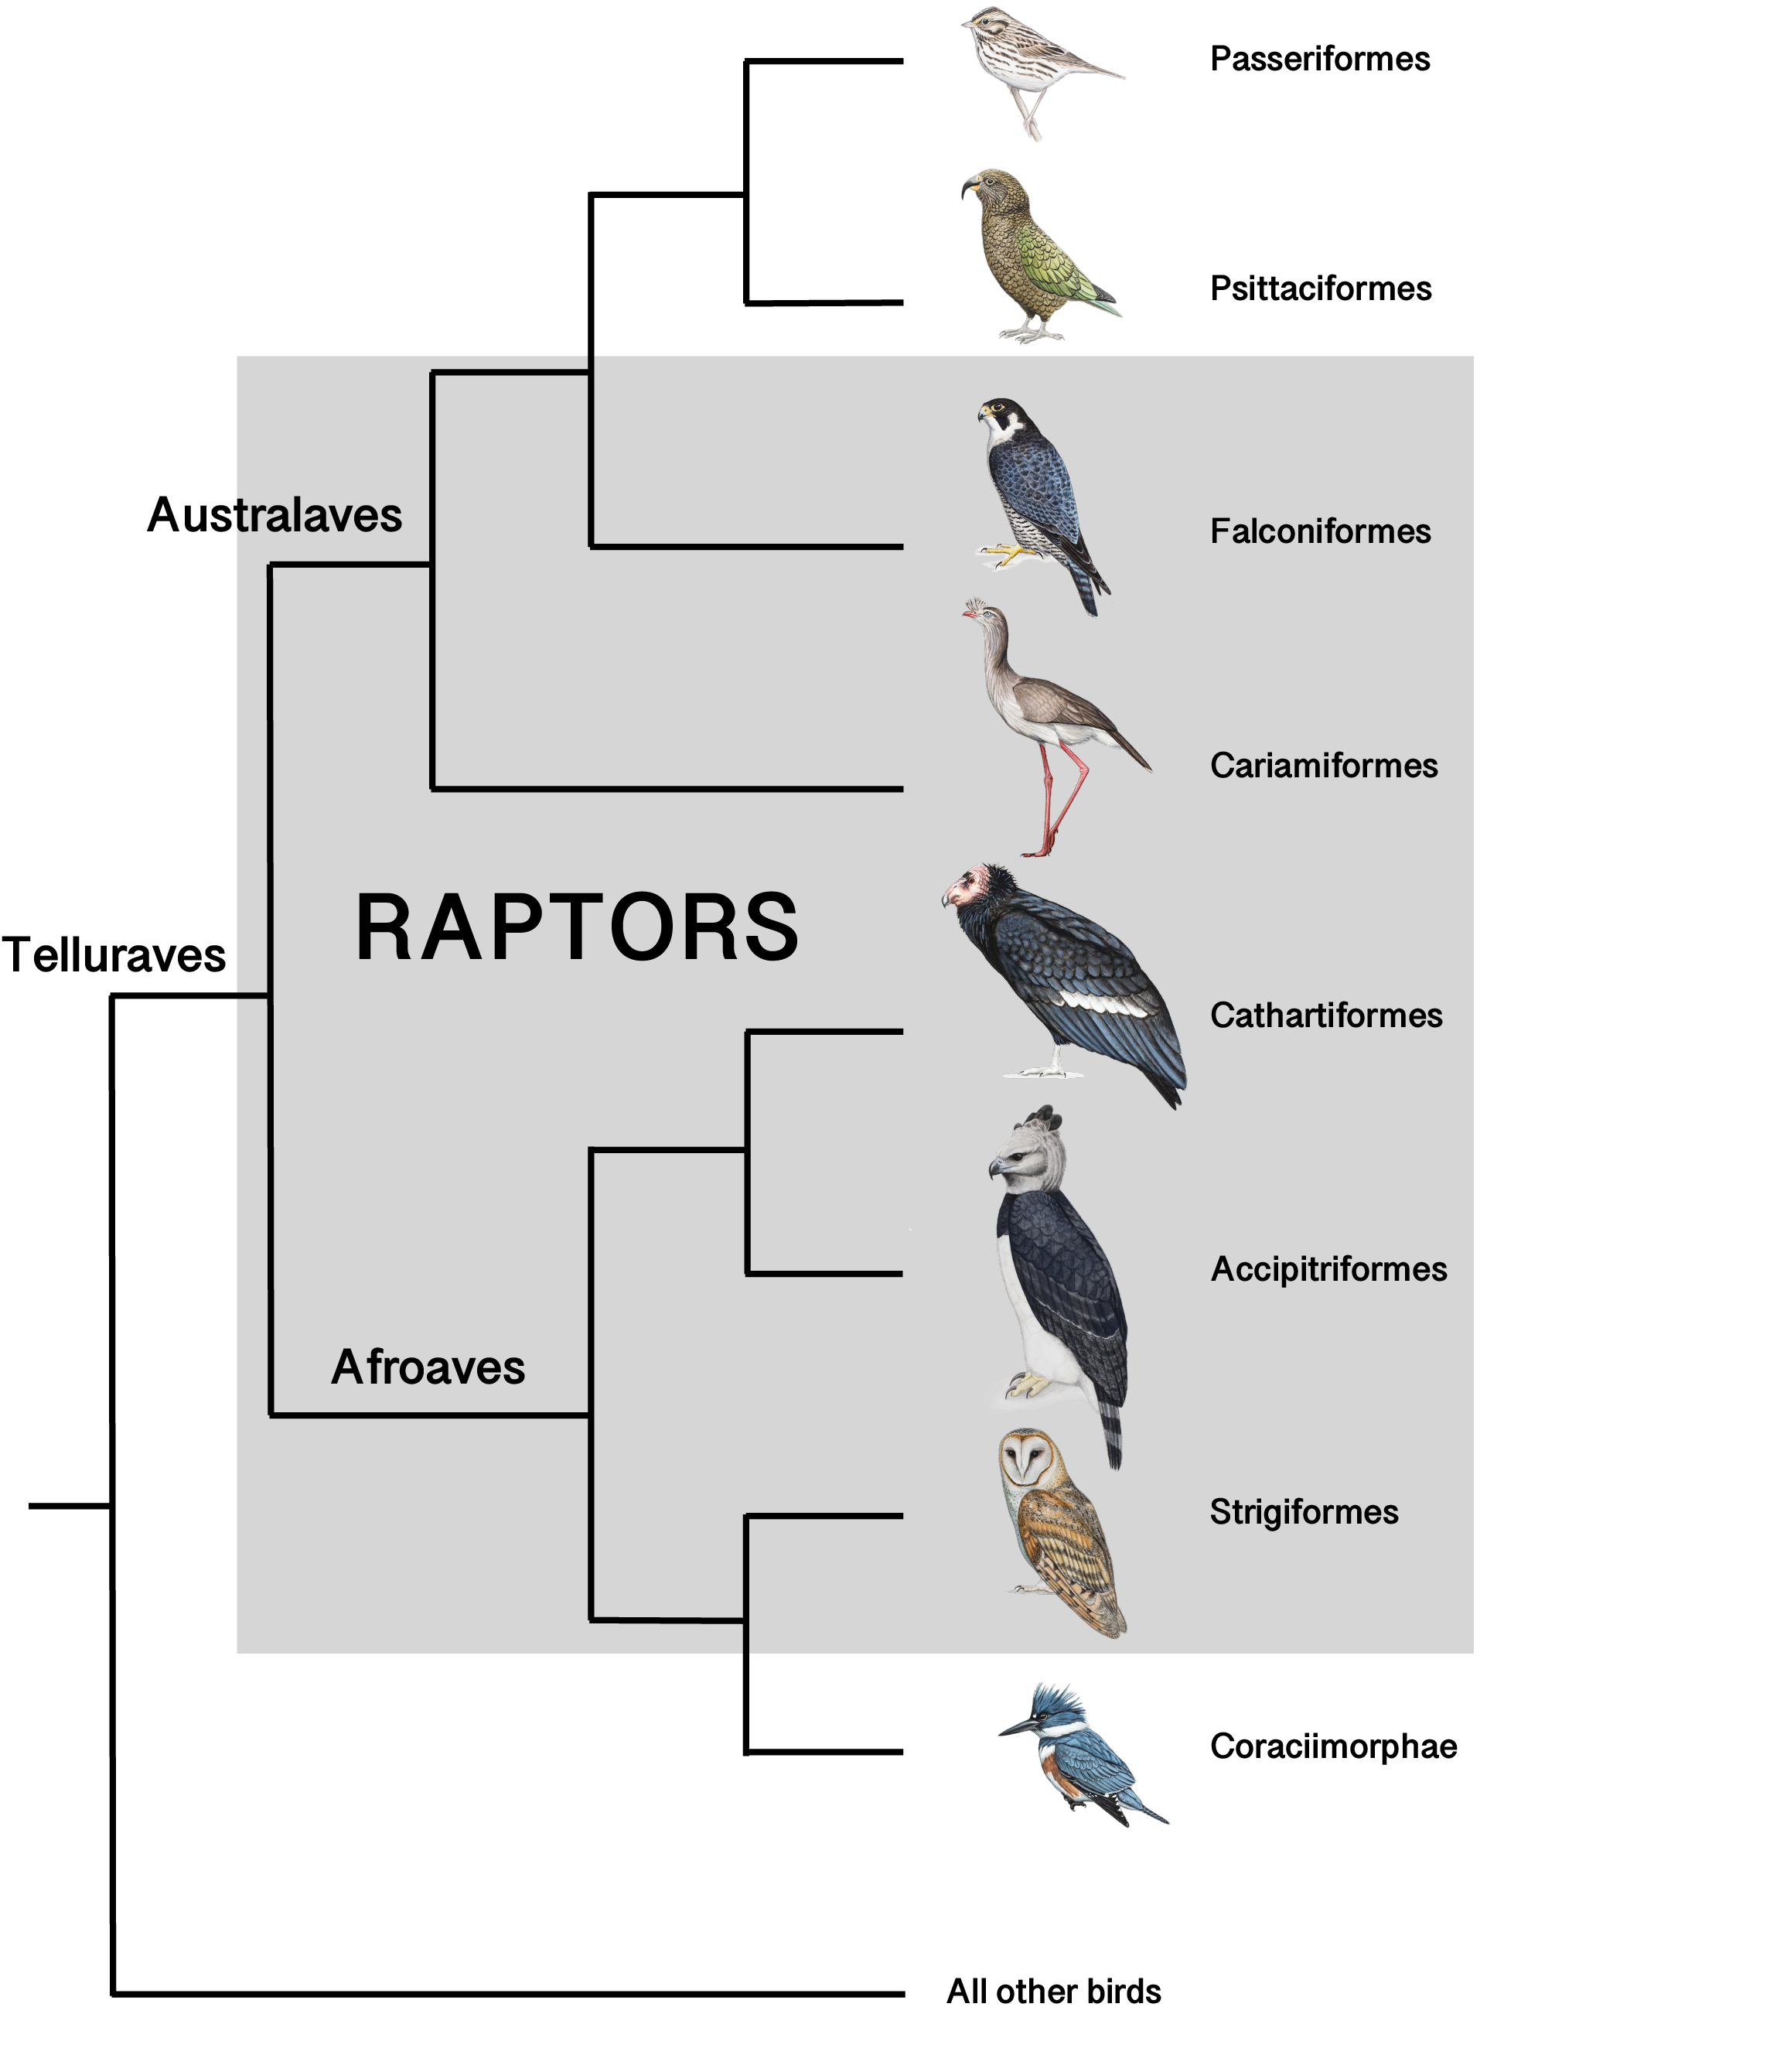 A Cladogram shows which groups of birds of prey evolved from which ancestors.